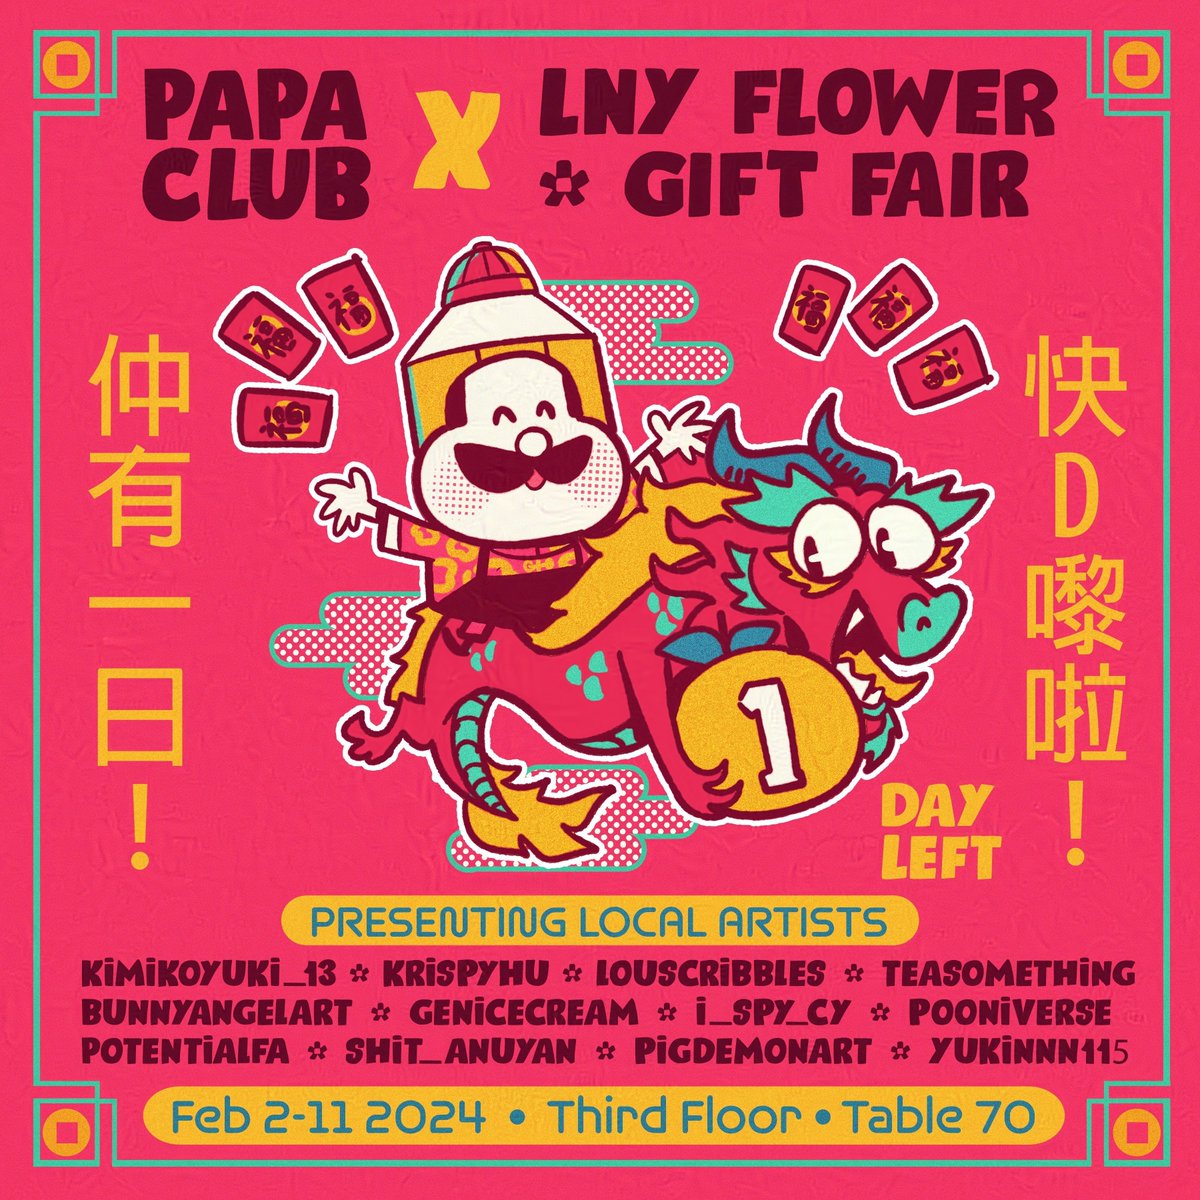 1 Day Left till PAPA CLUB Live at Aberdeen Center from Feb 2 - 11 for LNY We got tons of fun lucky goodies to start your up coming year!🧧🏮
Market time:
Fri-Sat 11am - 8 pm
Sun-Thurs 11am -7pm
We got daddies out here everyday for next 10 days to meet up with all of you 🫵👨🏻🫵 